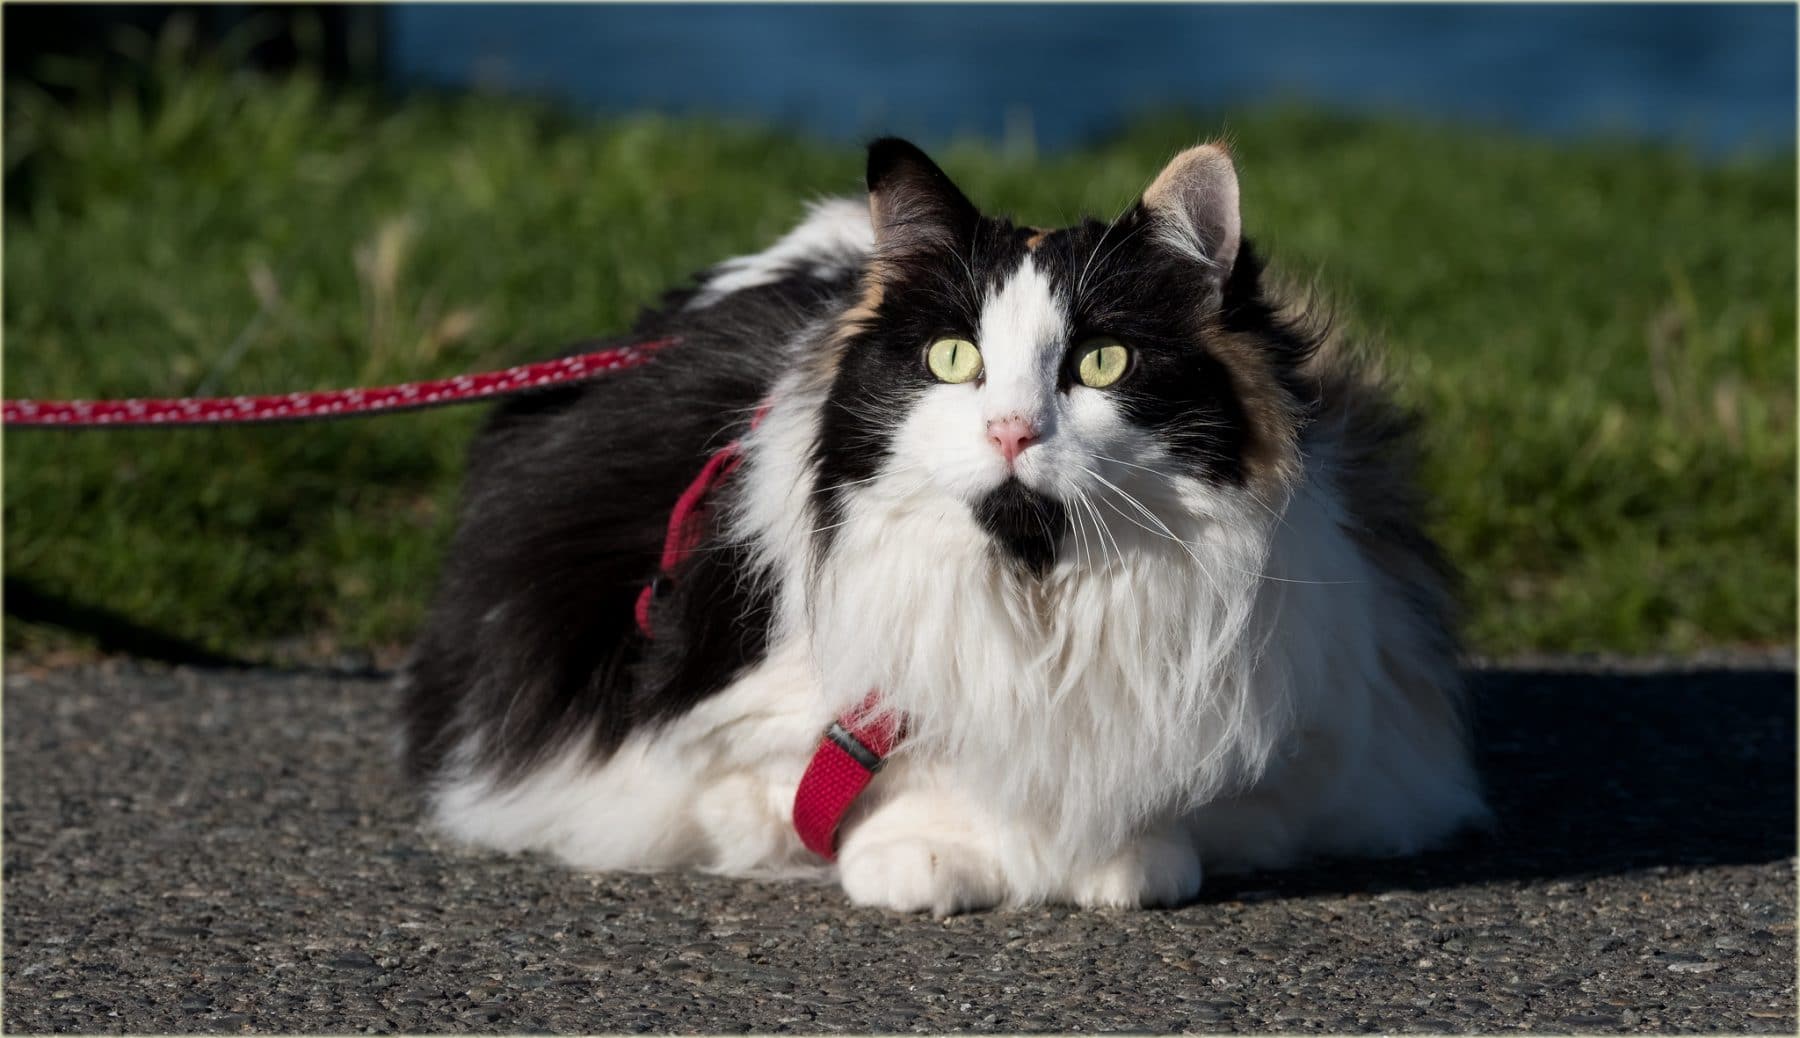 How to Train a Cat to Walk on a Leash: Tips, Steps and Gear